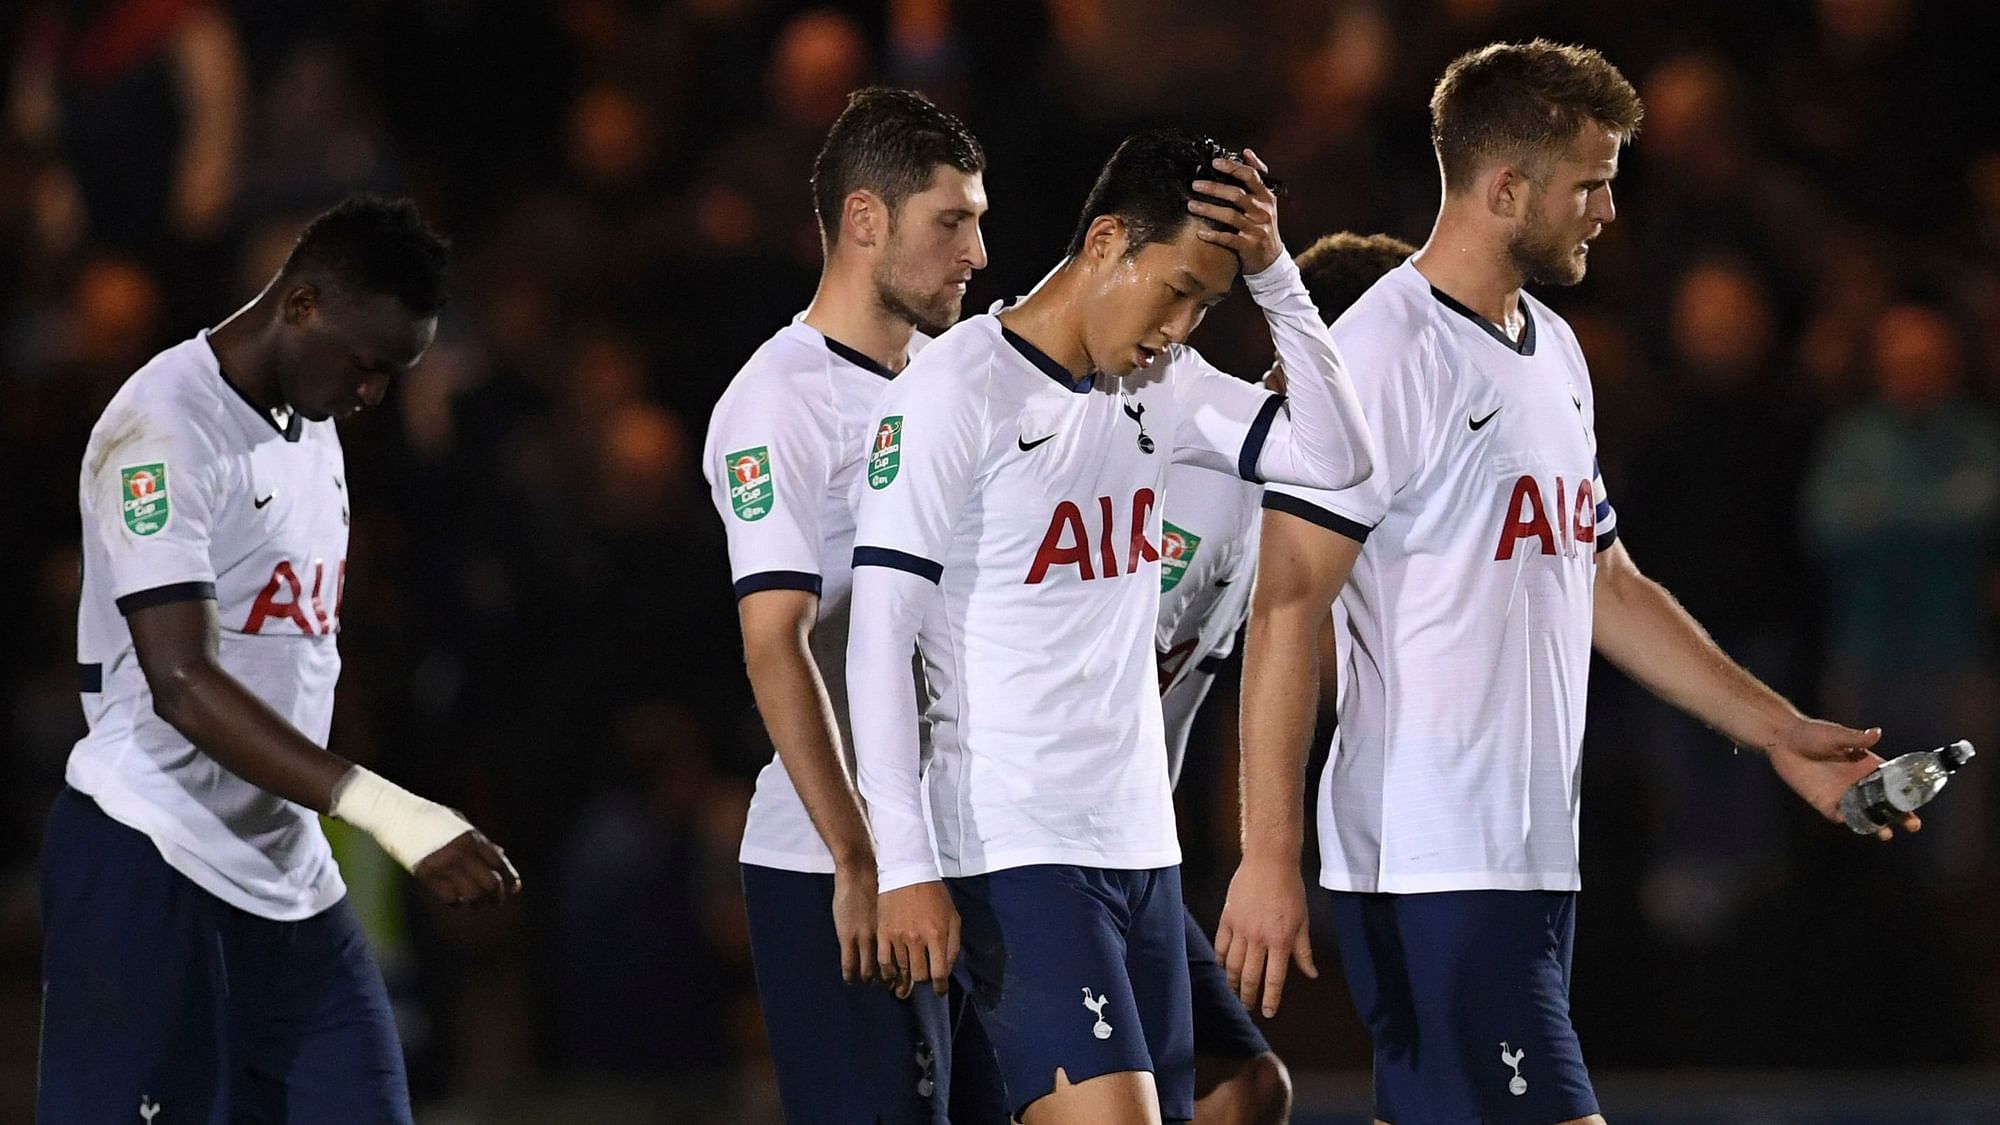 Tottenham was eliminated from the English League Cup by fourth-tier Colchester after a penalty shootout.